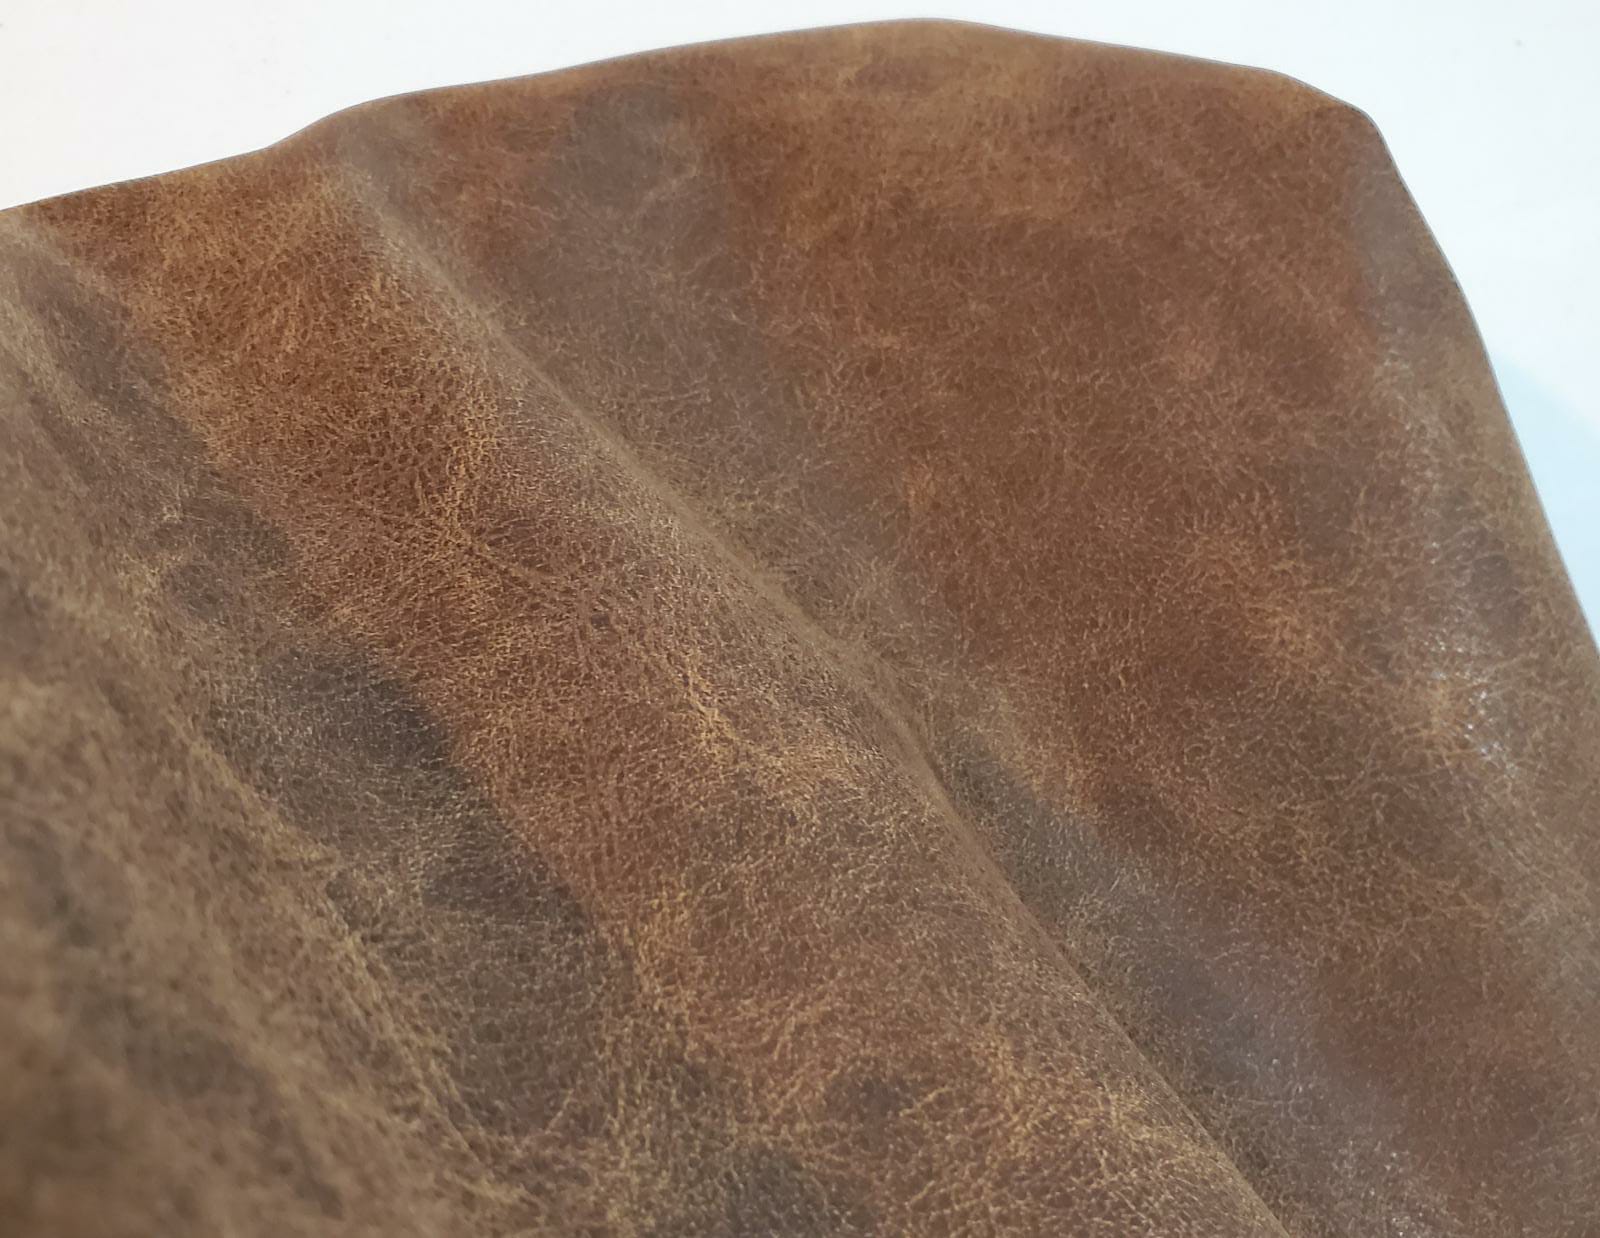  Faux vegan leather by the yard sheets distressed leather fabric for upholstery 30,000 Double Rubs vinyl sheets nappa leather crafts bookbinding books furniture fabrics uphilstery fuax material pu pleather faiux learher cruelty free nappa seat brown distressed